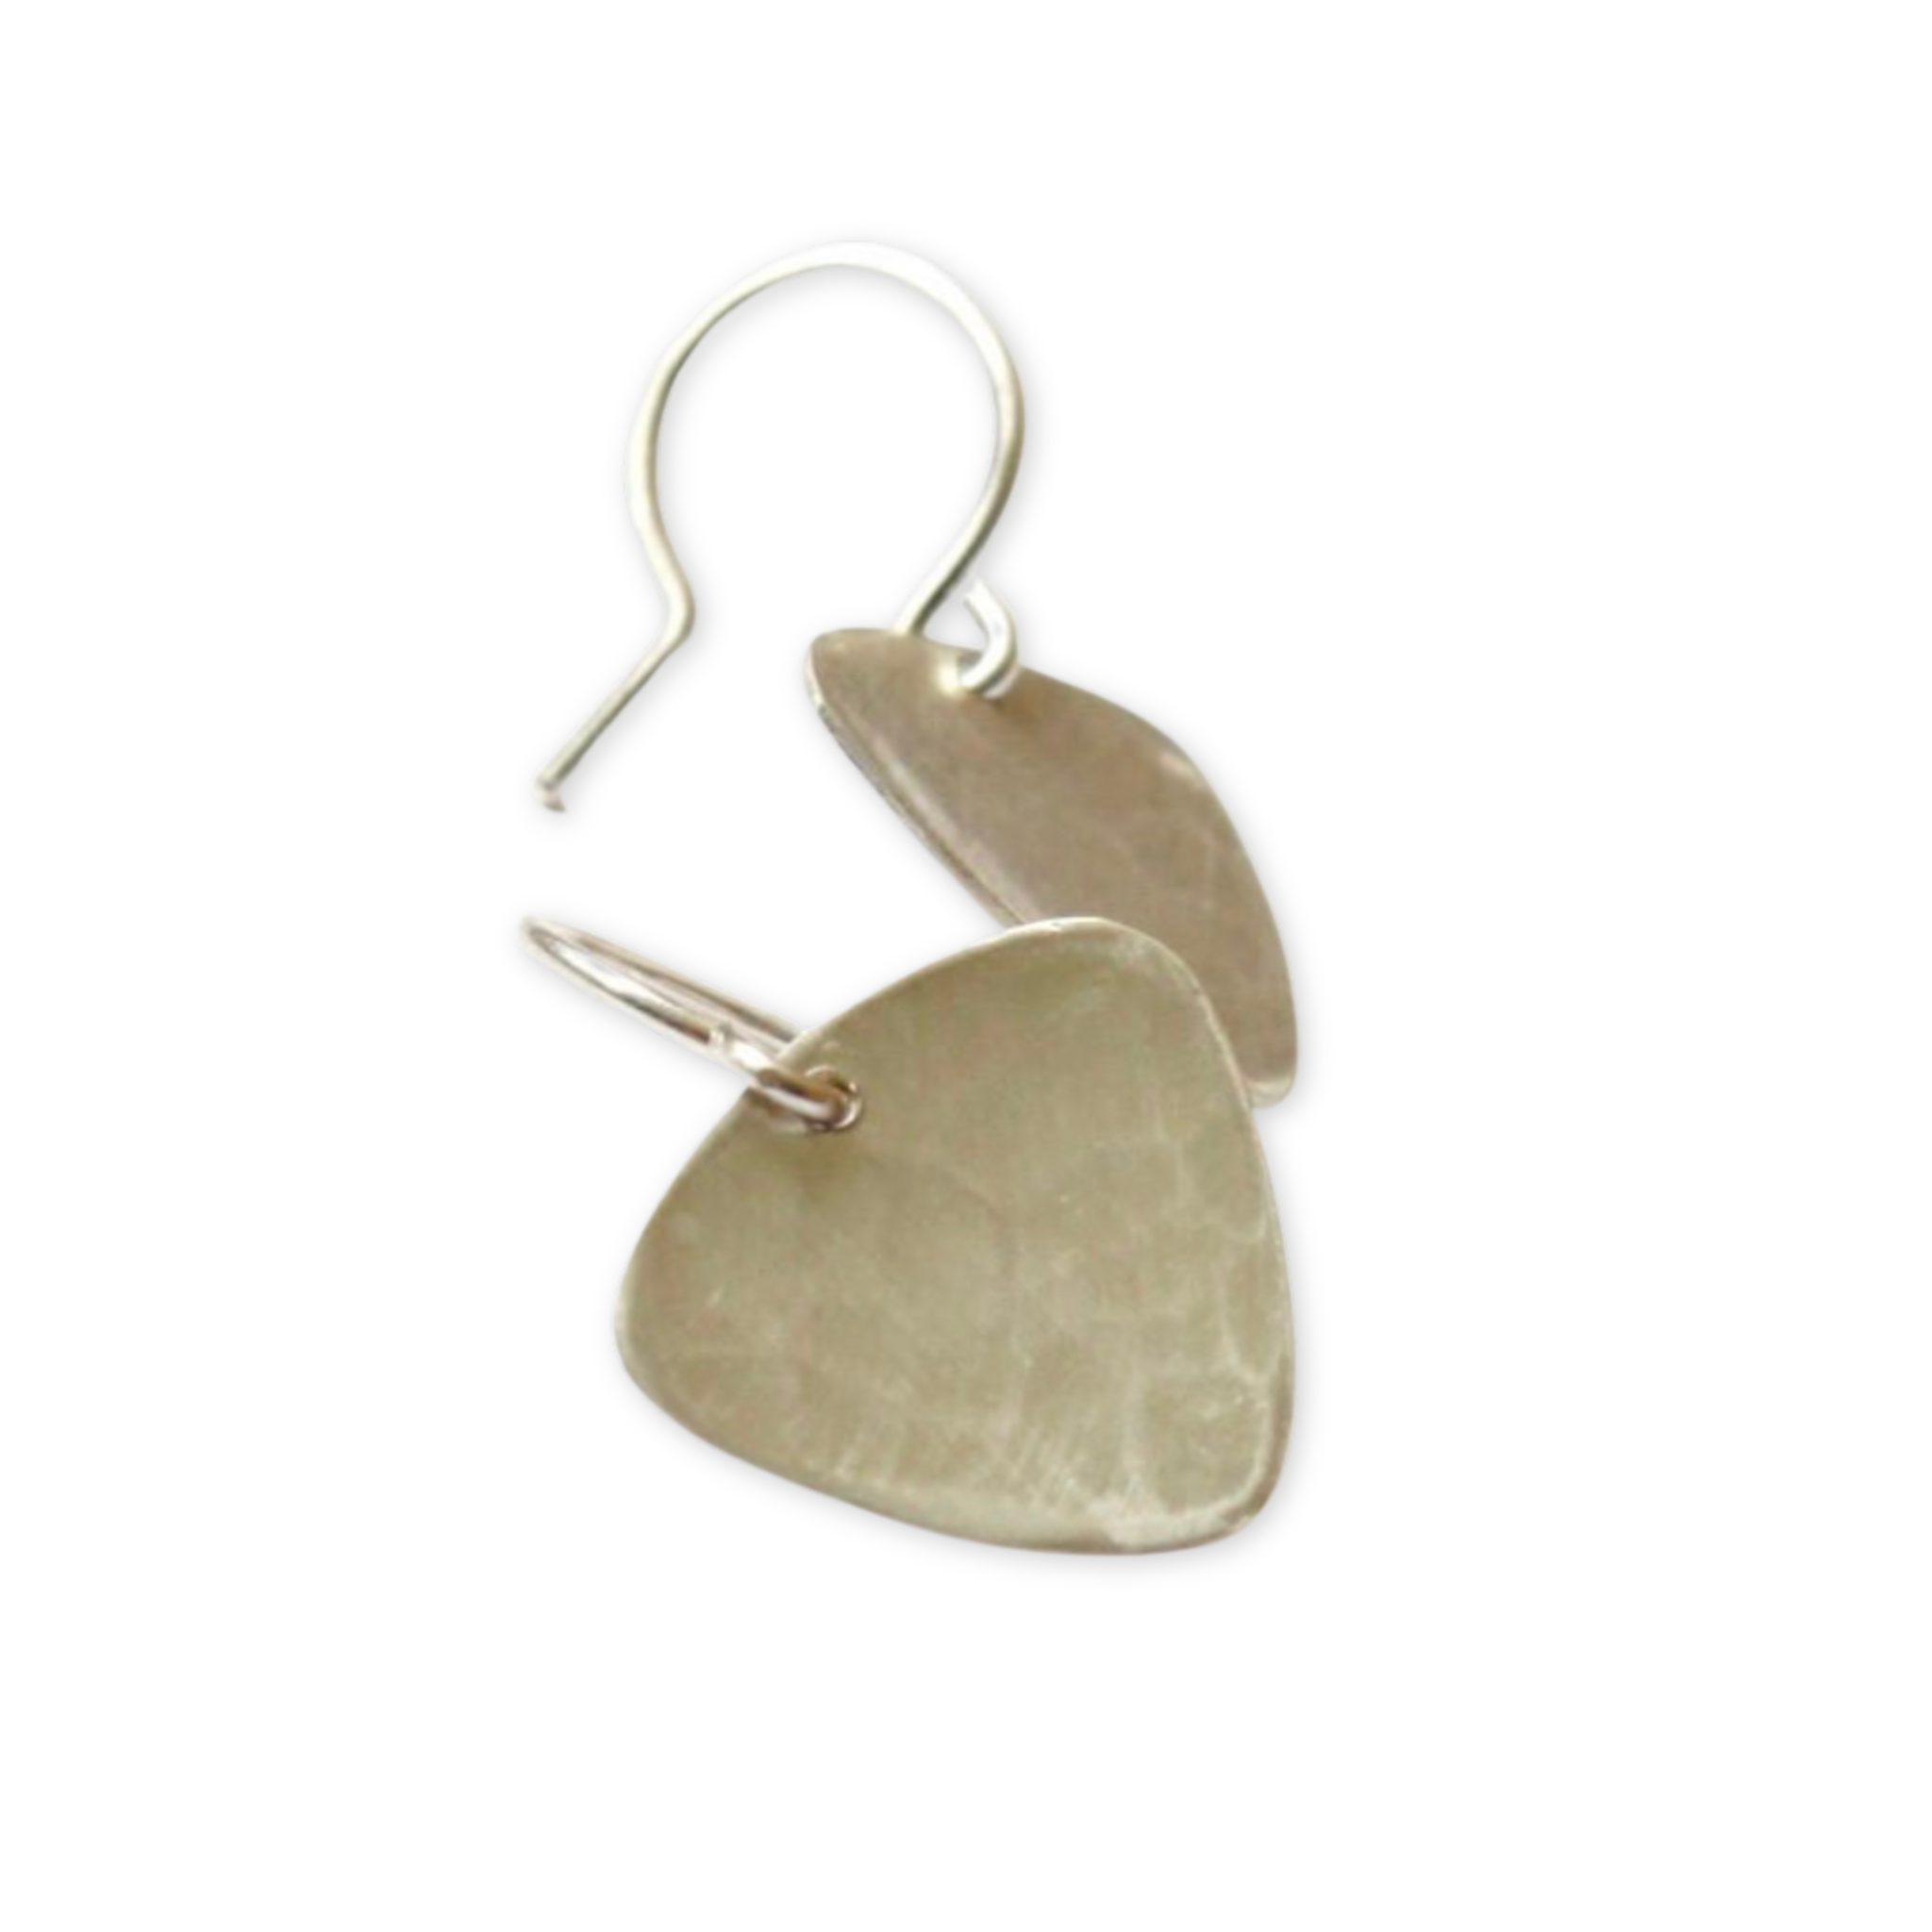 earrings with textured rounded triangle shaped pendants